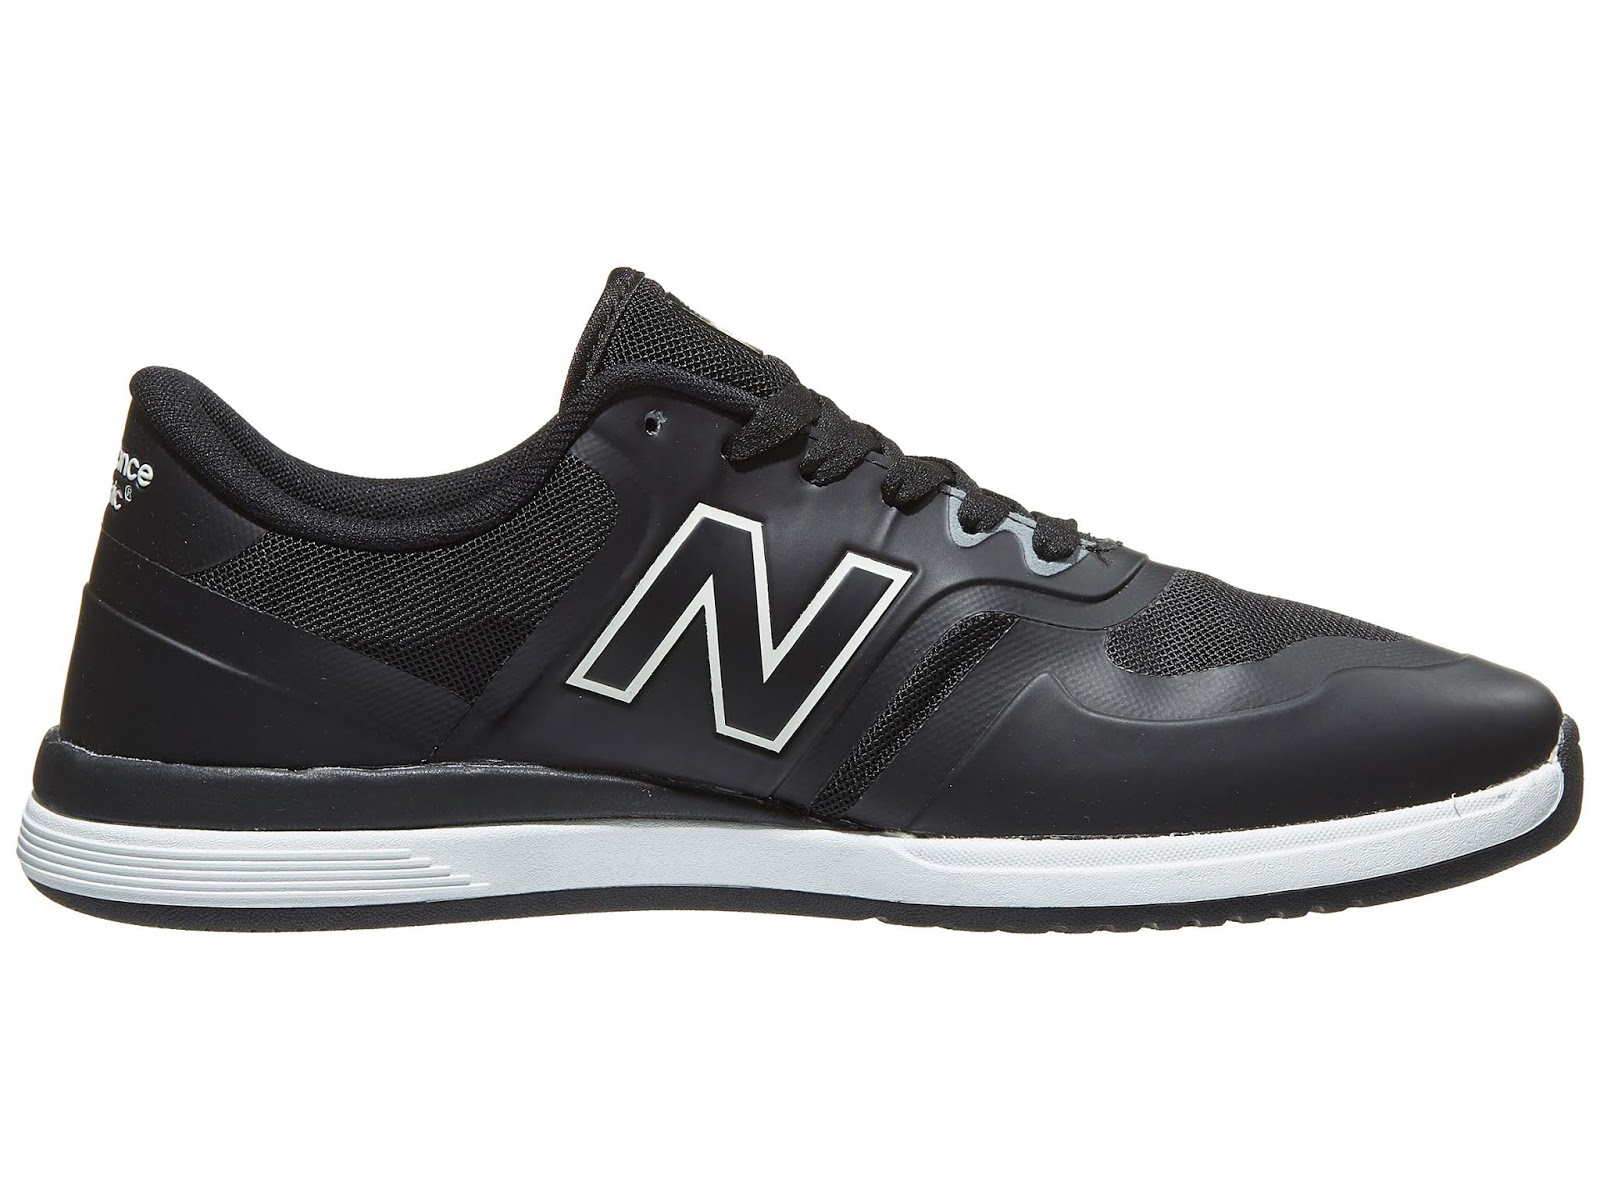 Deal of the Day: New Balance Numeric 420 Skate Shoes $80 Only at Skate ...